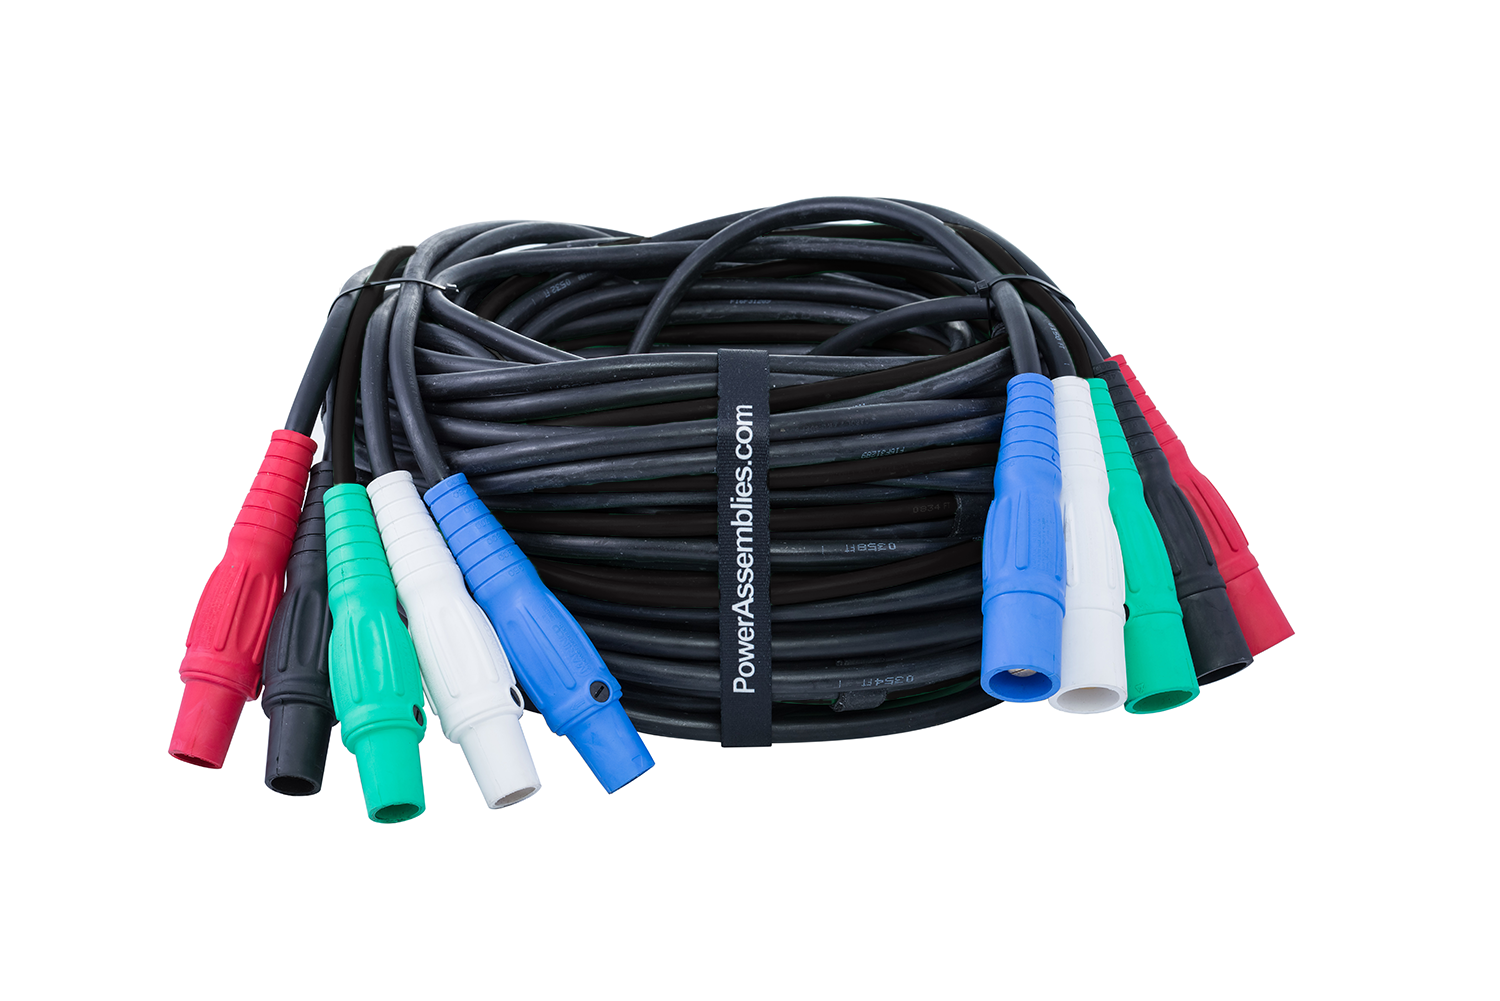 #2 AWG Banded Cable Set with Camlocks Rated for 190A